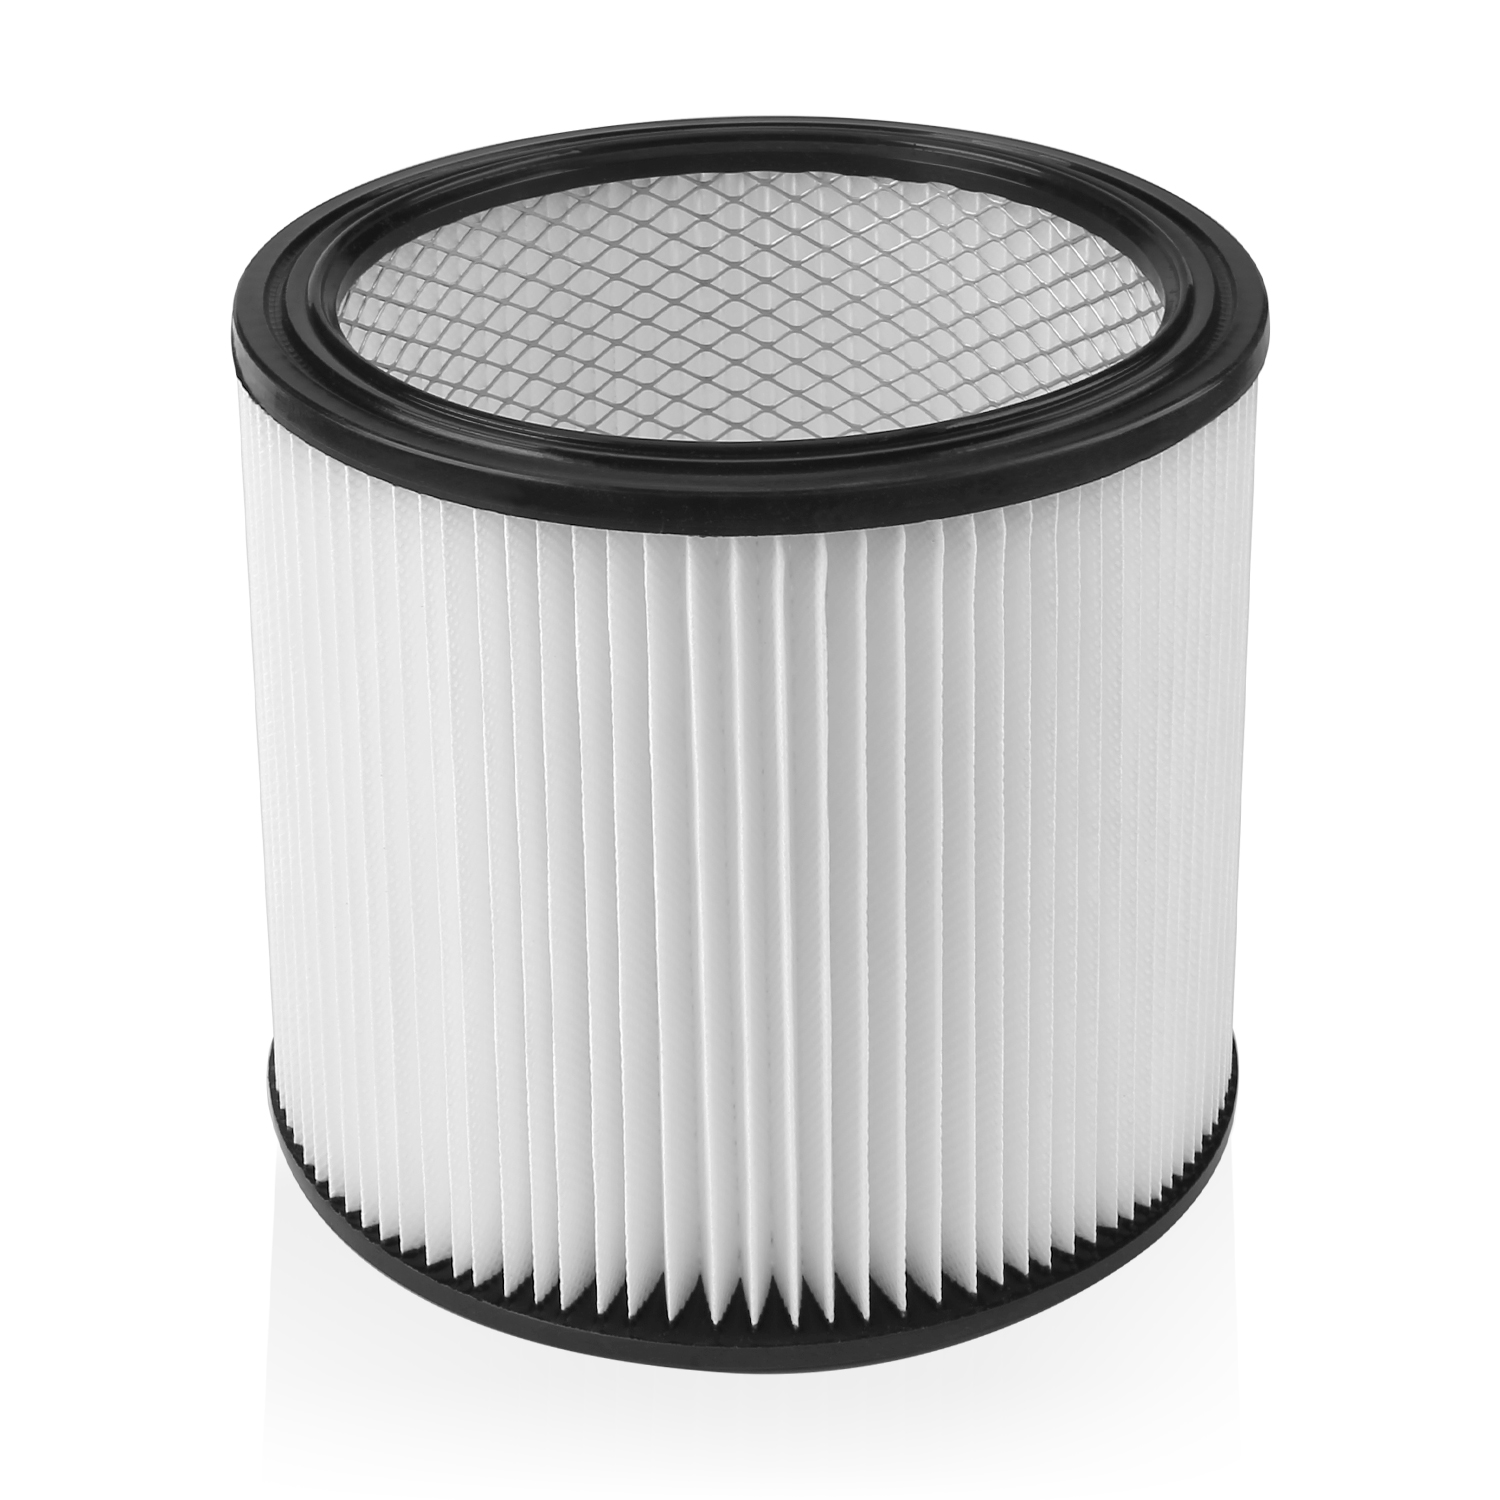 2 Pack 90304 Cartridge Filters Compatible with Shop Vac 9030400 90350 90333 Replacement Filter with 90585 Foam Sleeve Compatible with Shop Vac 5 Gallon Up Wet//Dry Vacuum Cleaners